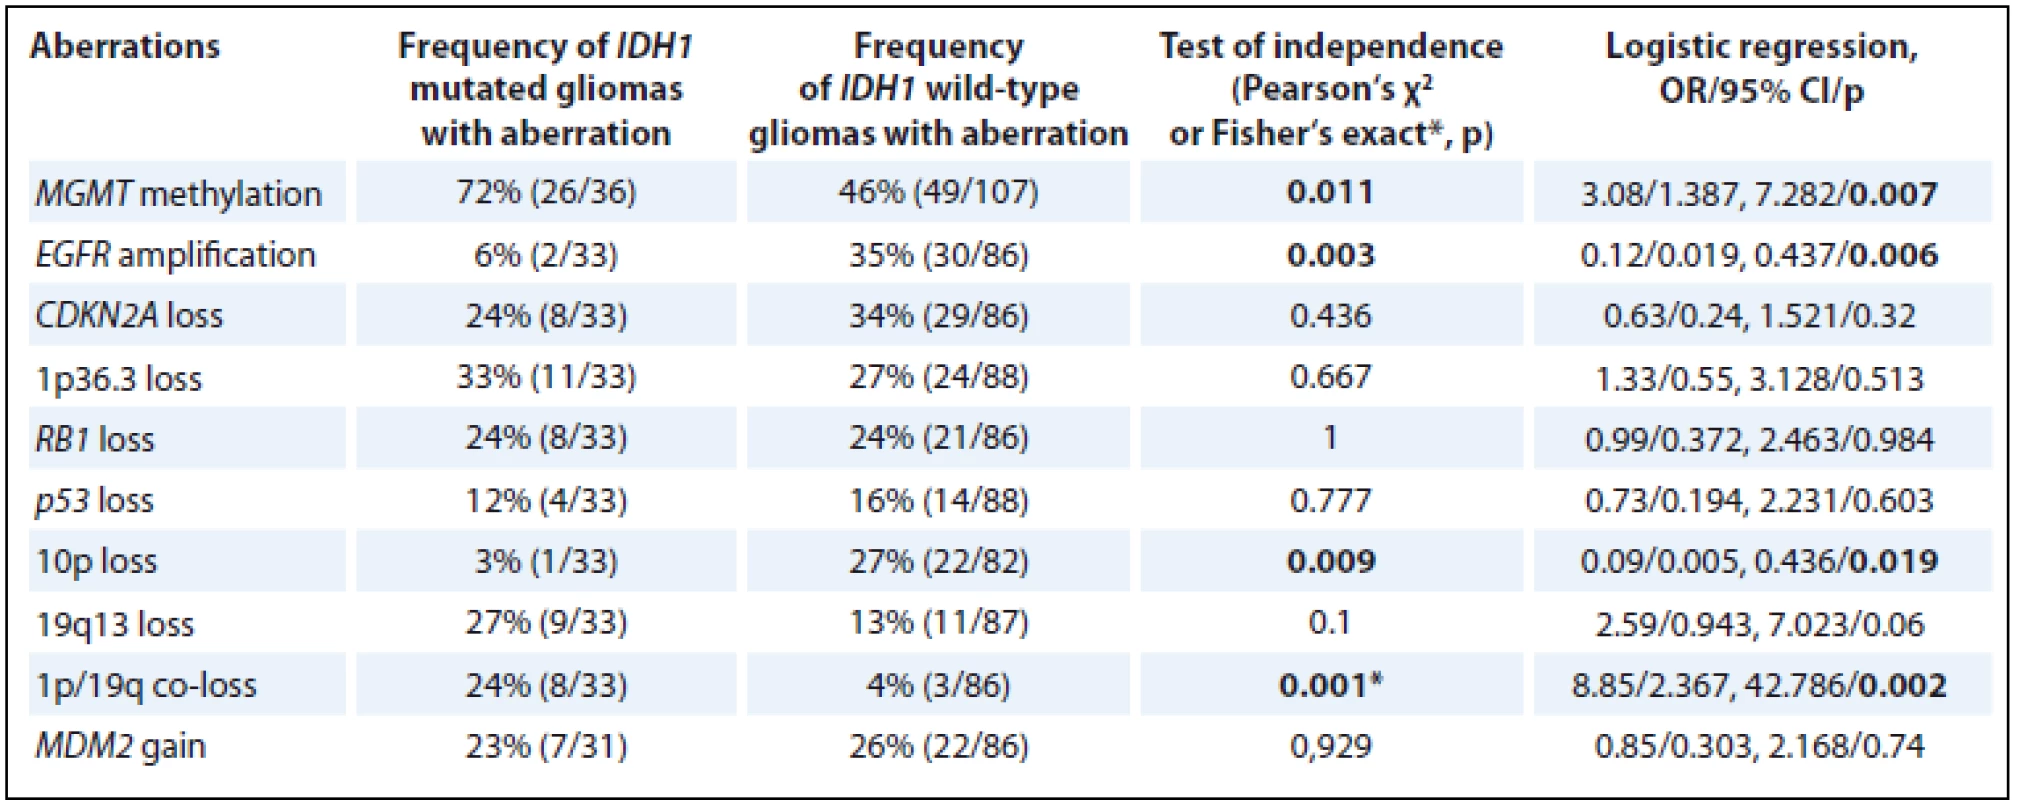 Association between IDH1 mutations and other molecular genetic aberrations.